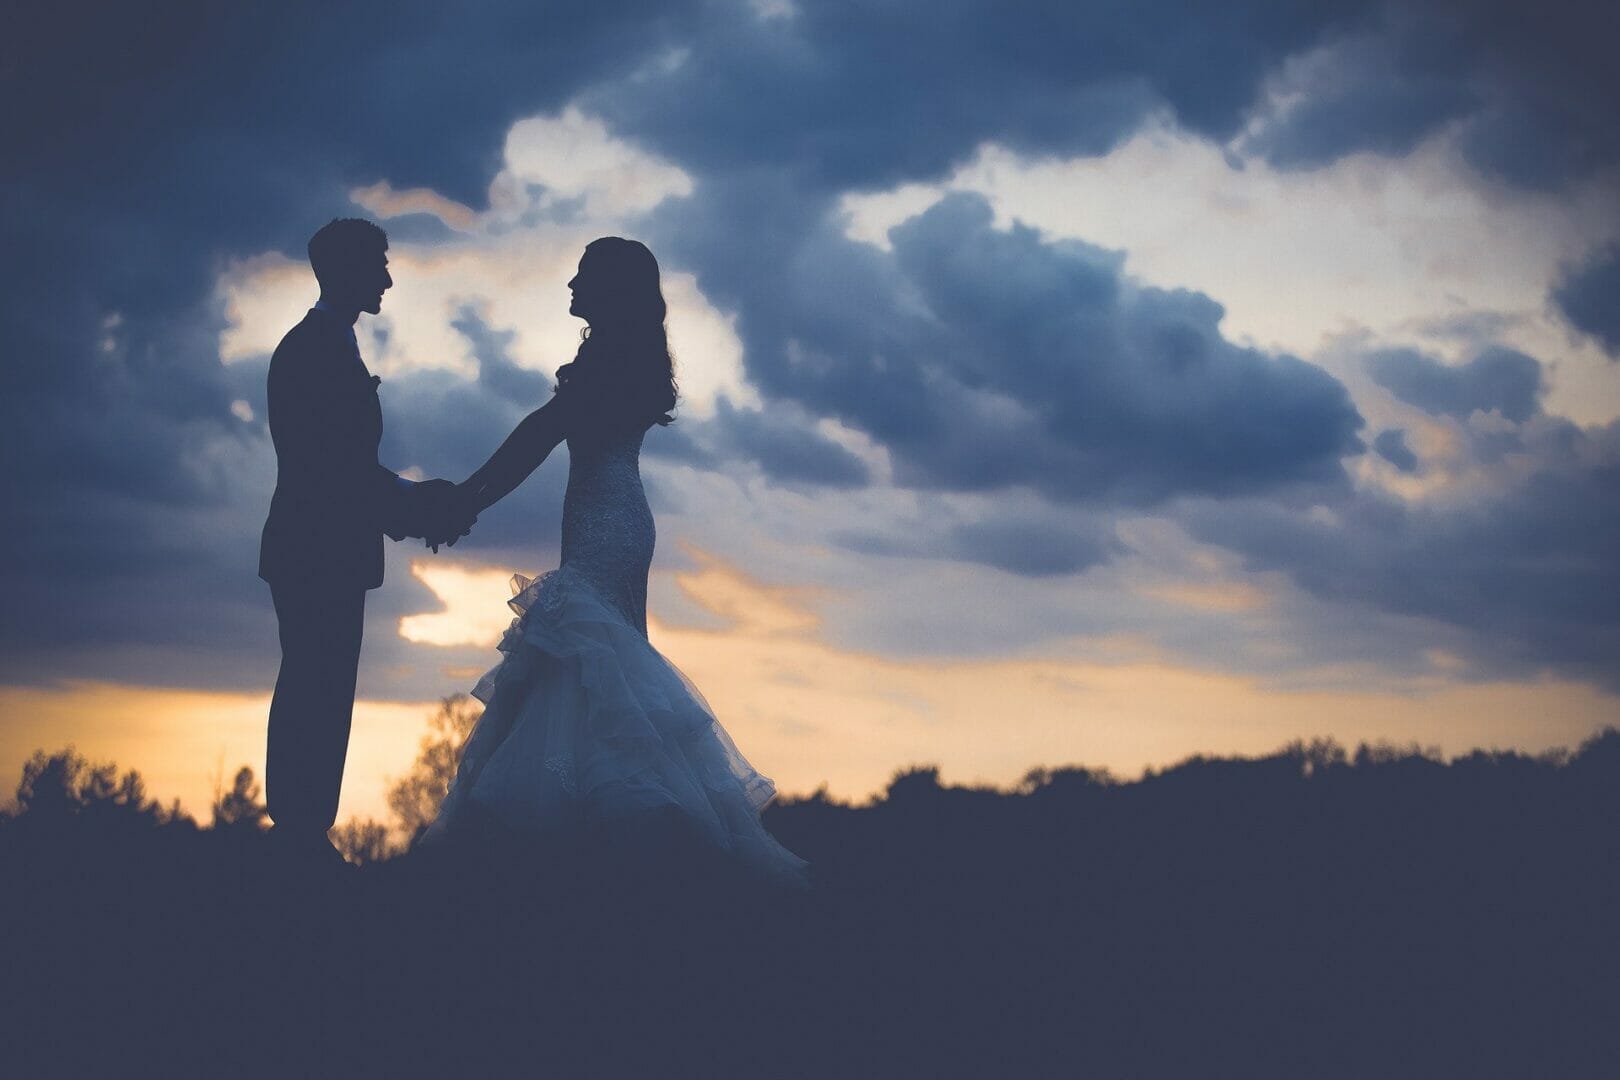 Wedding Anxieties: Coping With Concerns Over Your Big Day